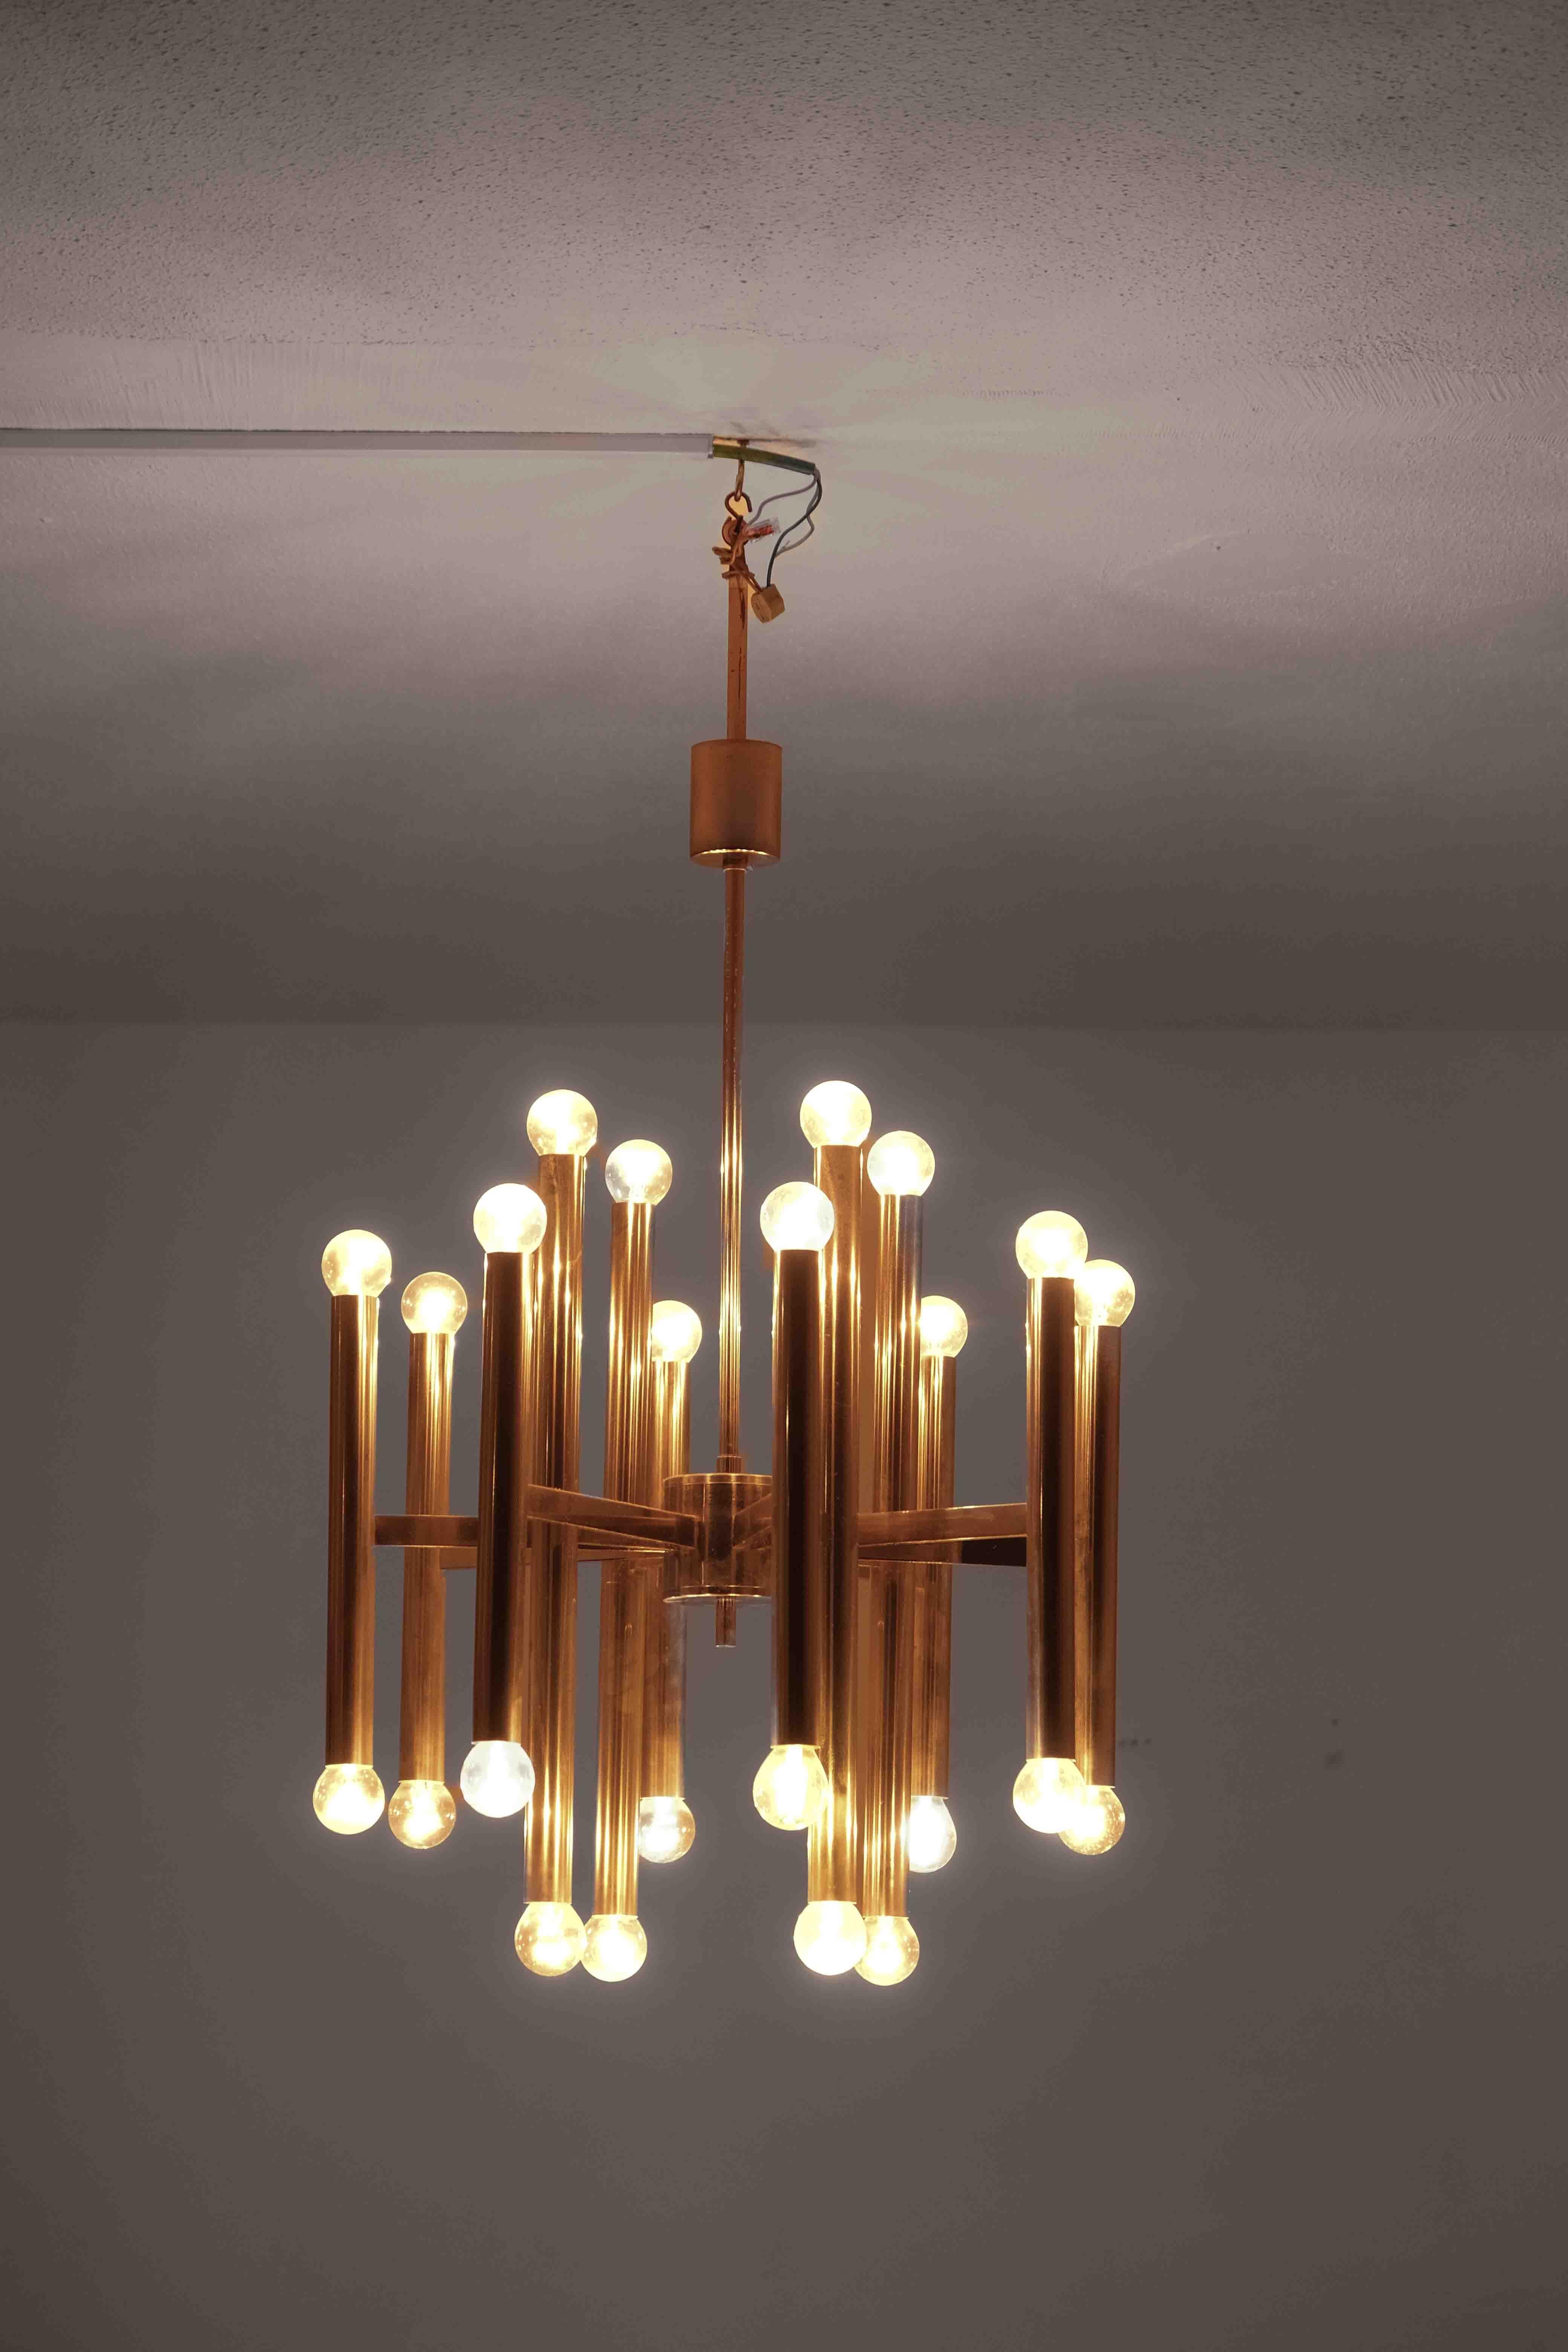 This striking chandelier, crafted in the 1960s, is a quintessential example of Gaetano Sciolari’s innovative design approach. The structure features a symmetrical assembly of 12 slender brass rods, each tipped with 2 glowing bulb, creating a radiant